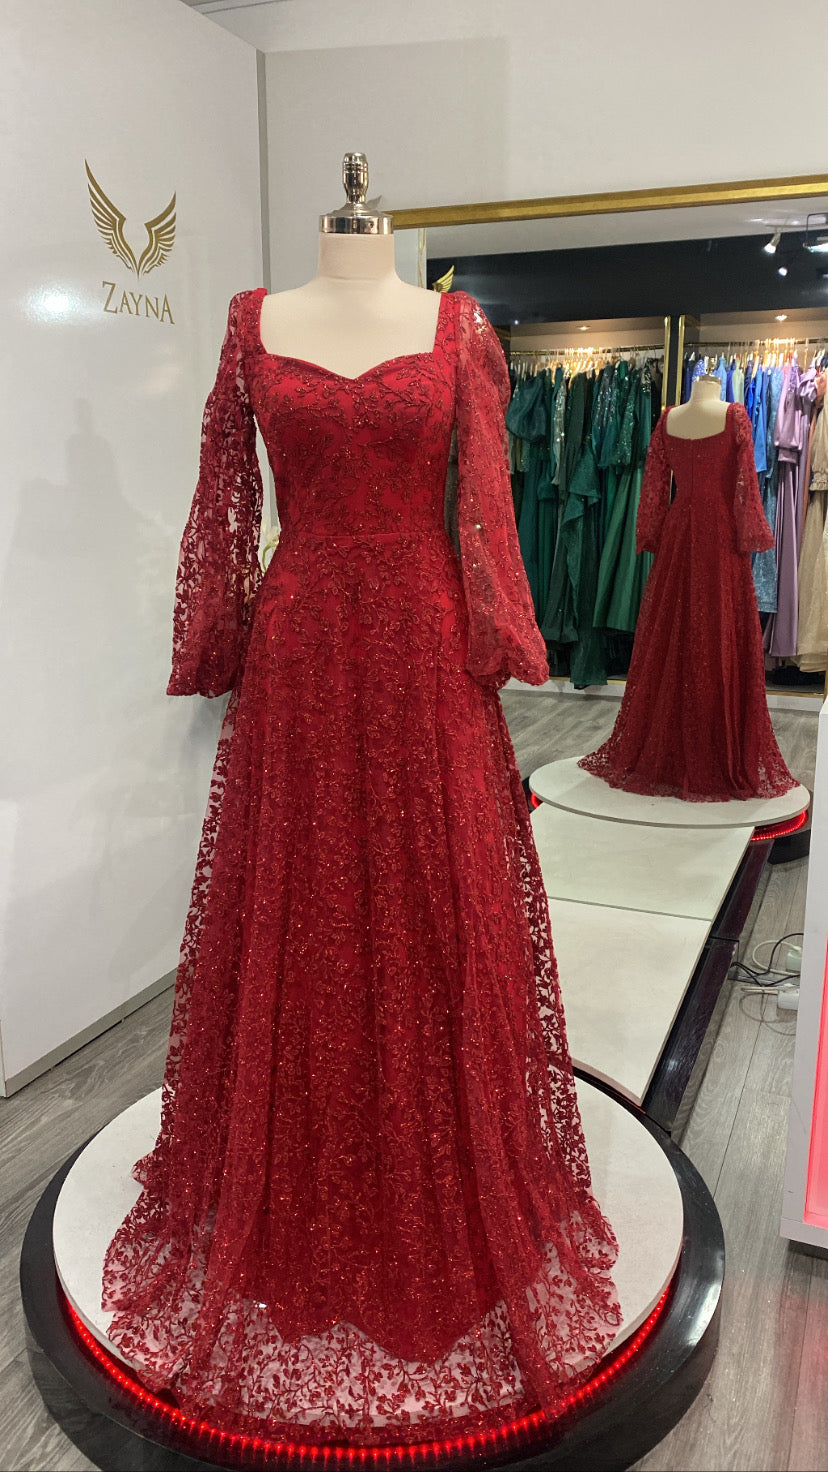 Elegant red dress with flower design and glitter